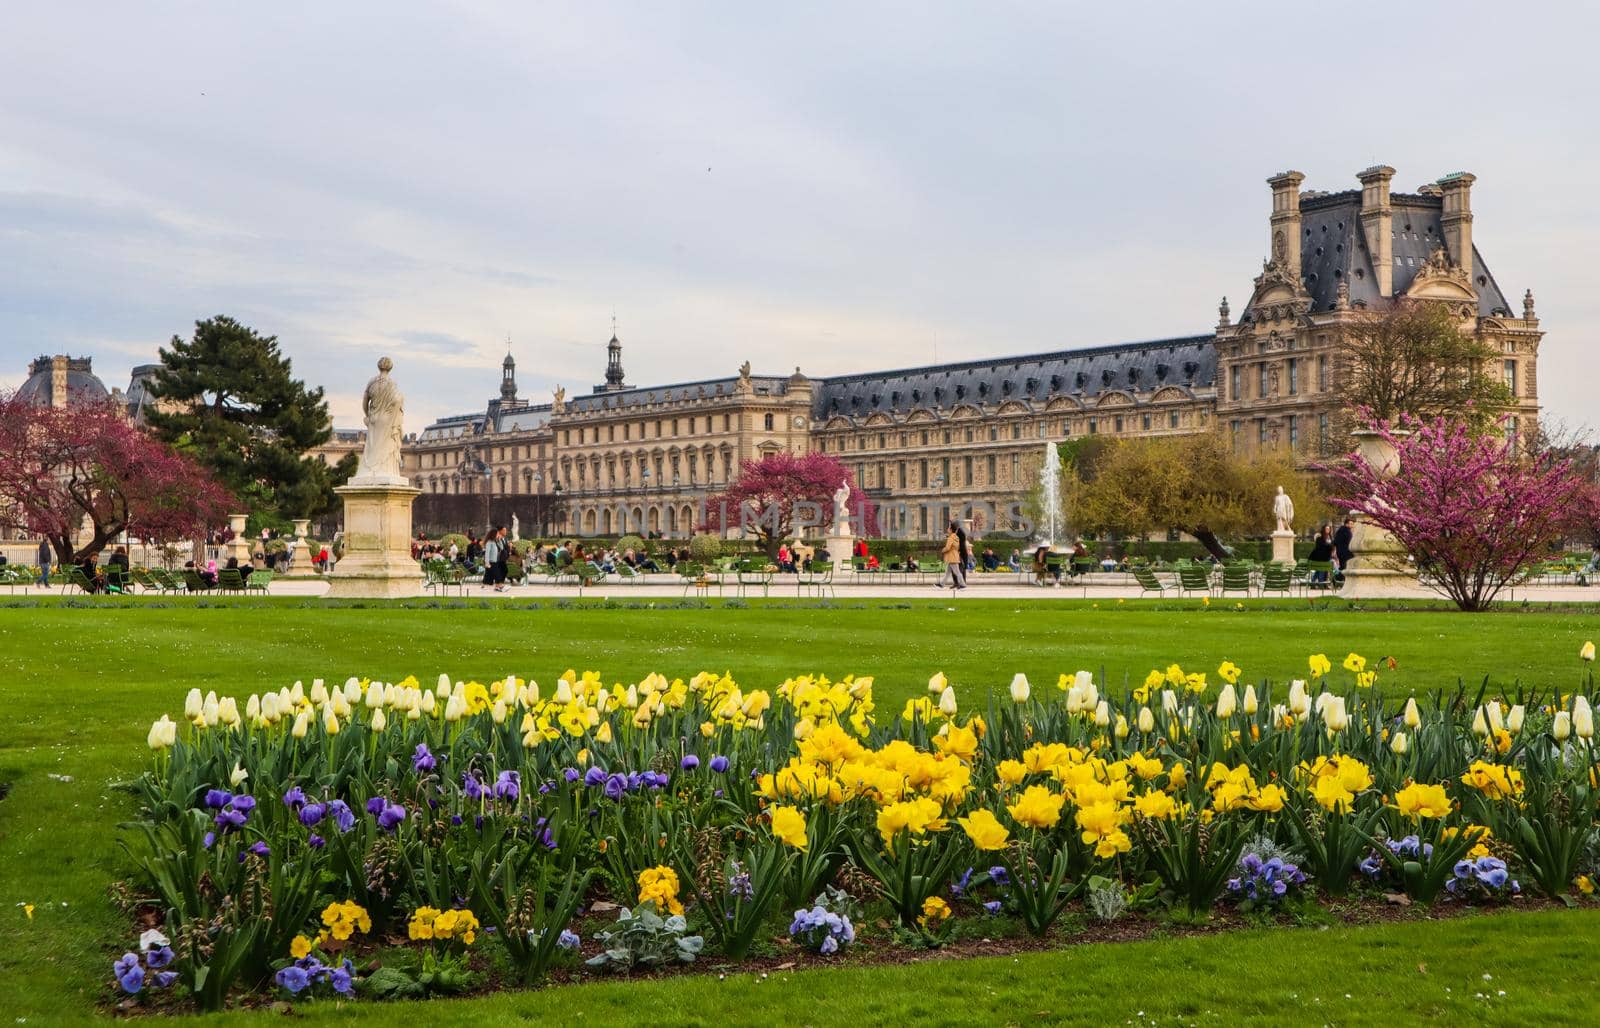 Marvelous spring Tuileries garden and view at the Louvre Palace in Paris France. April 2019